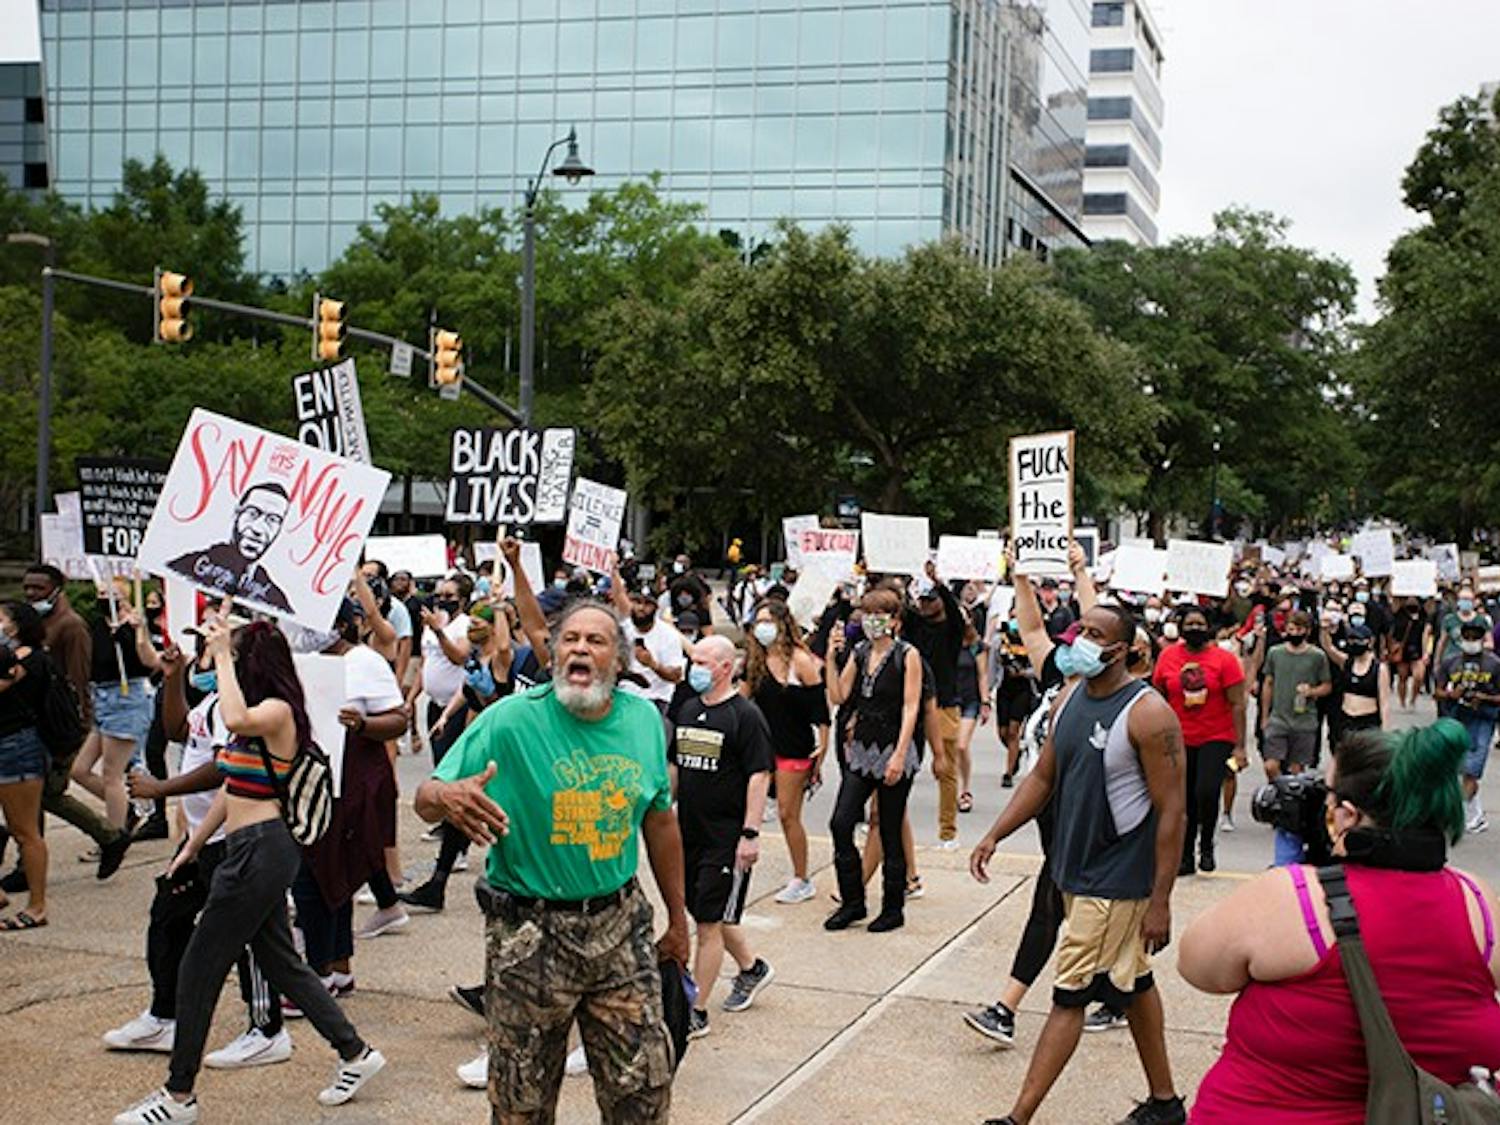 People marching at the “I Can’t Breathe” protest move towards the Statehouse in Columbia on May 30.&nbsp;